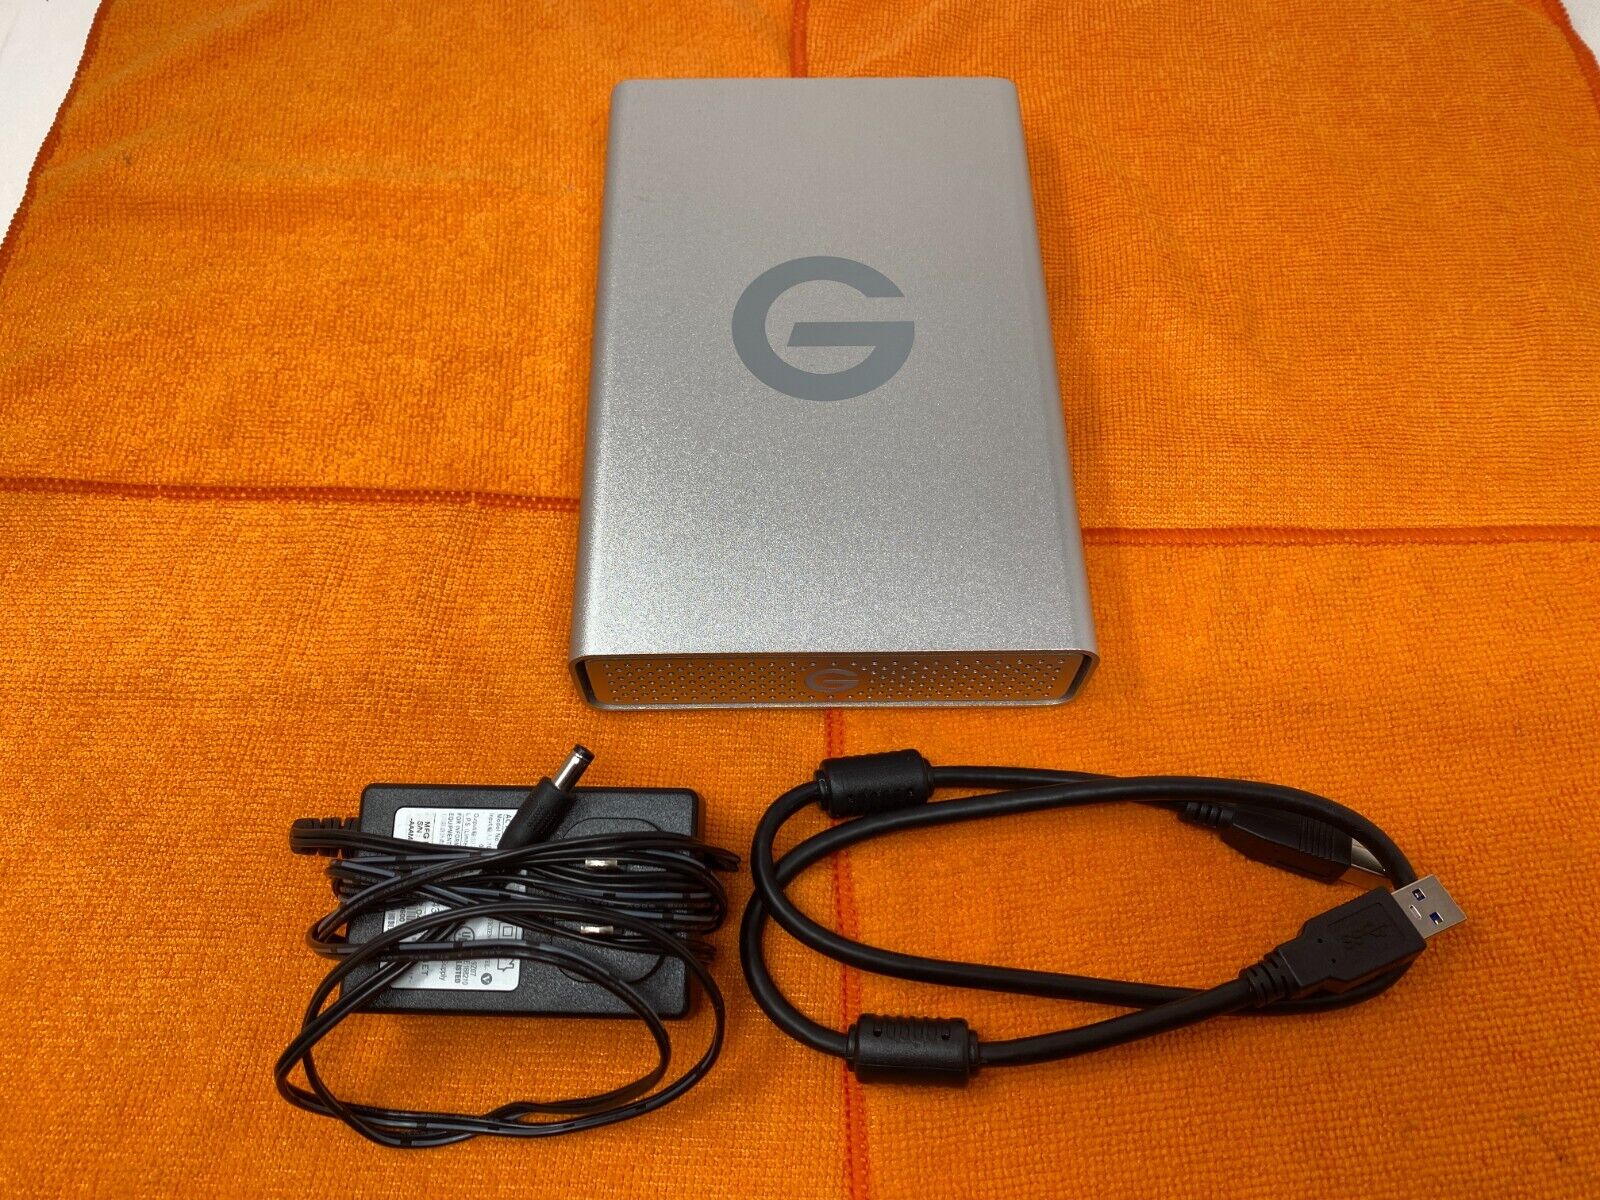 G-TECHNOLOGY 4TB G-DRIVE USB 3.0 EXTERNAL HARD DRIVE W/CHARGER USAGE 17 HOURS